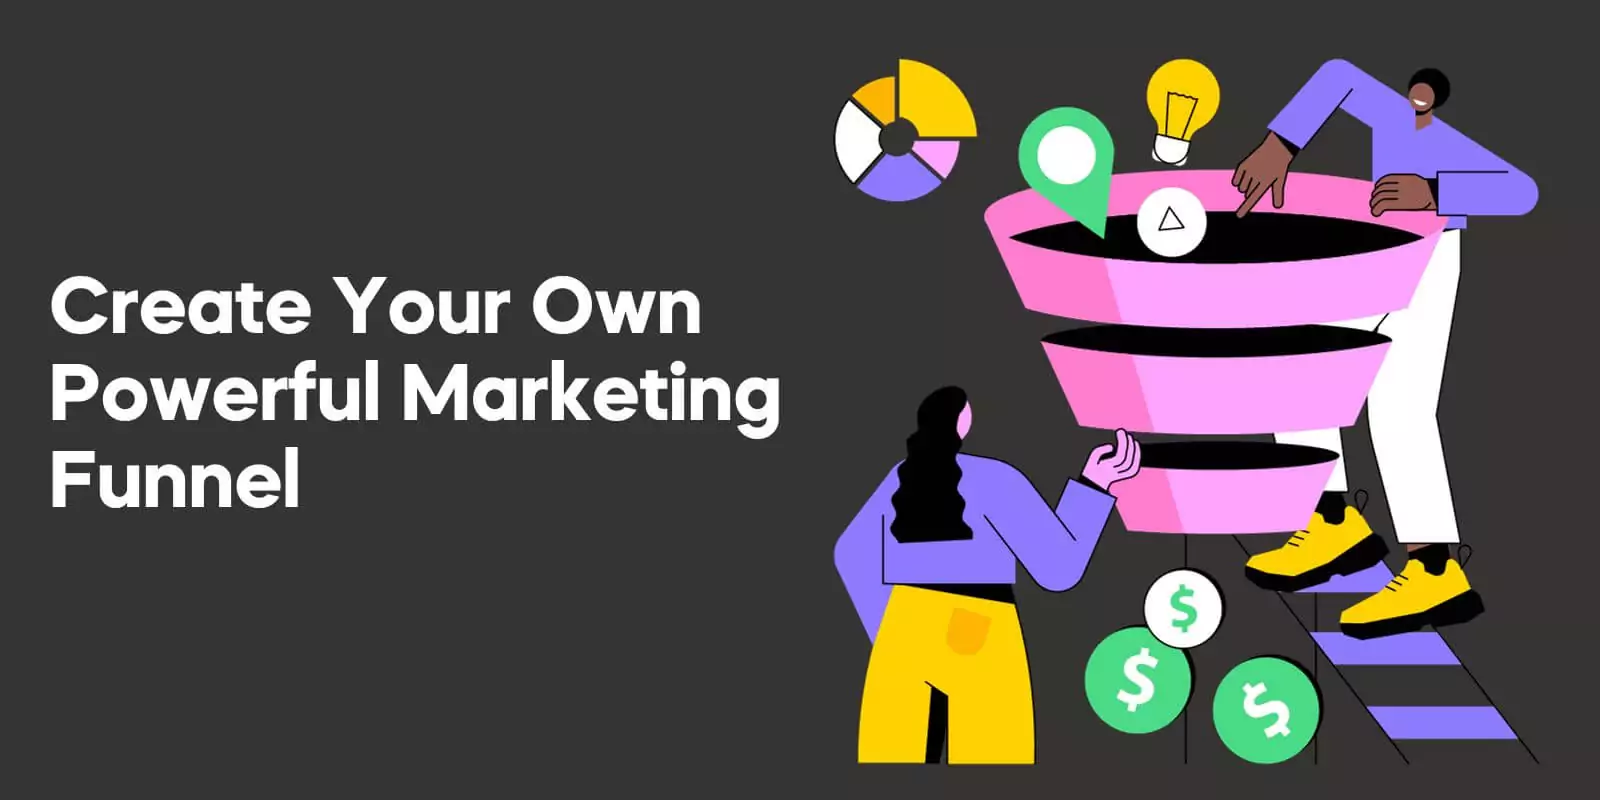 Create Your Own Powerful Marketing Funnel